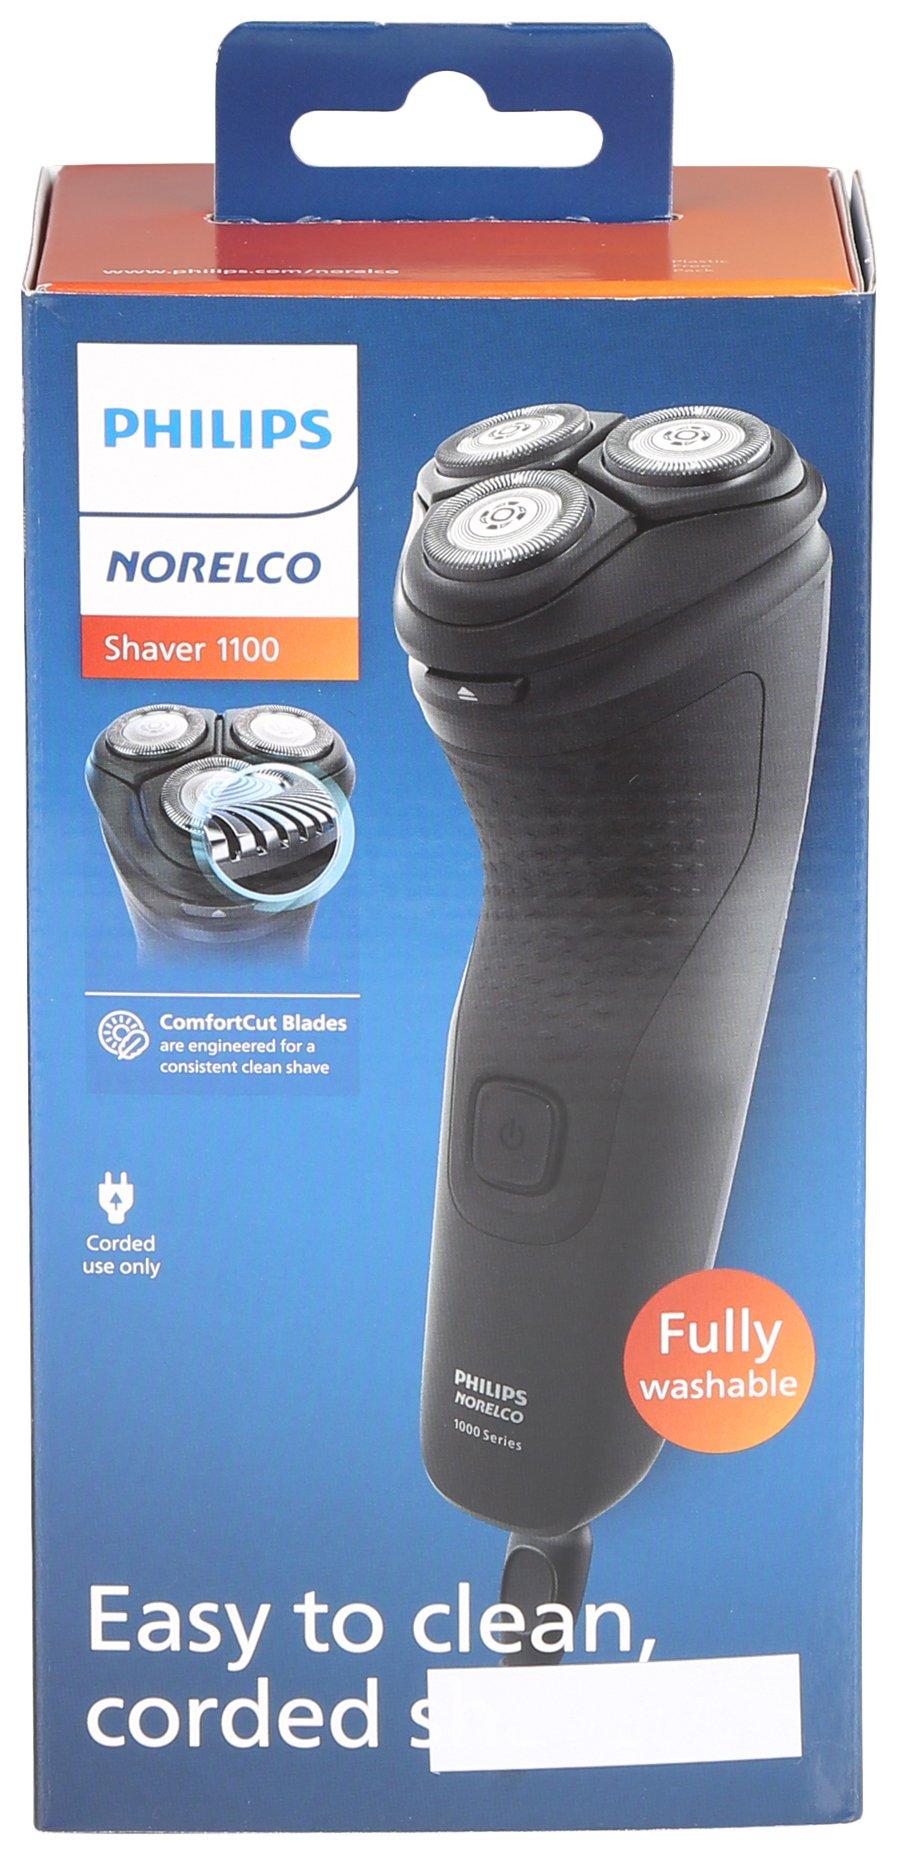 Norelco 1100 Corded Electric Shaver